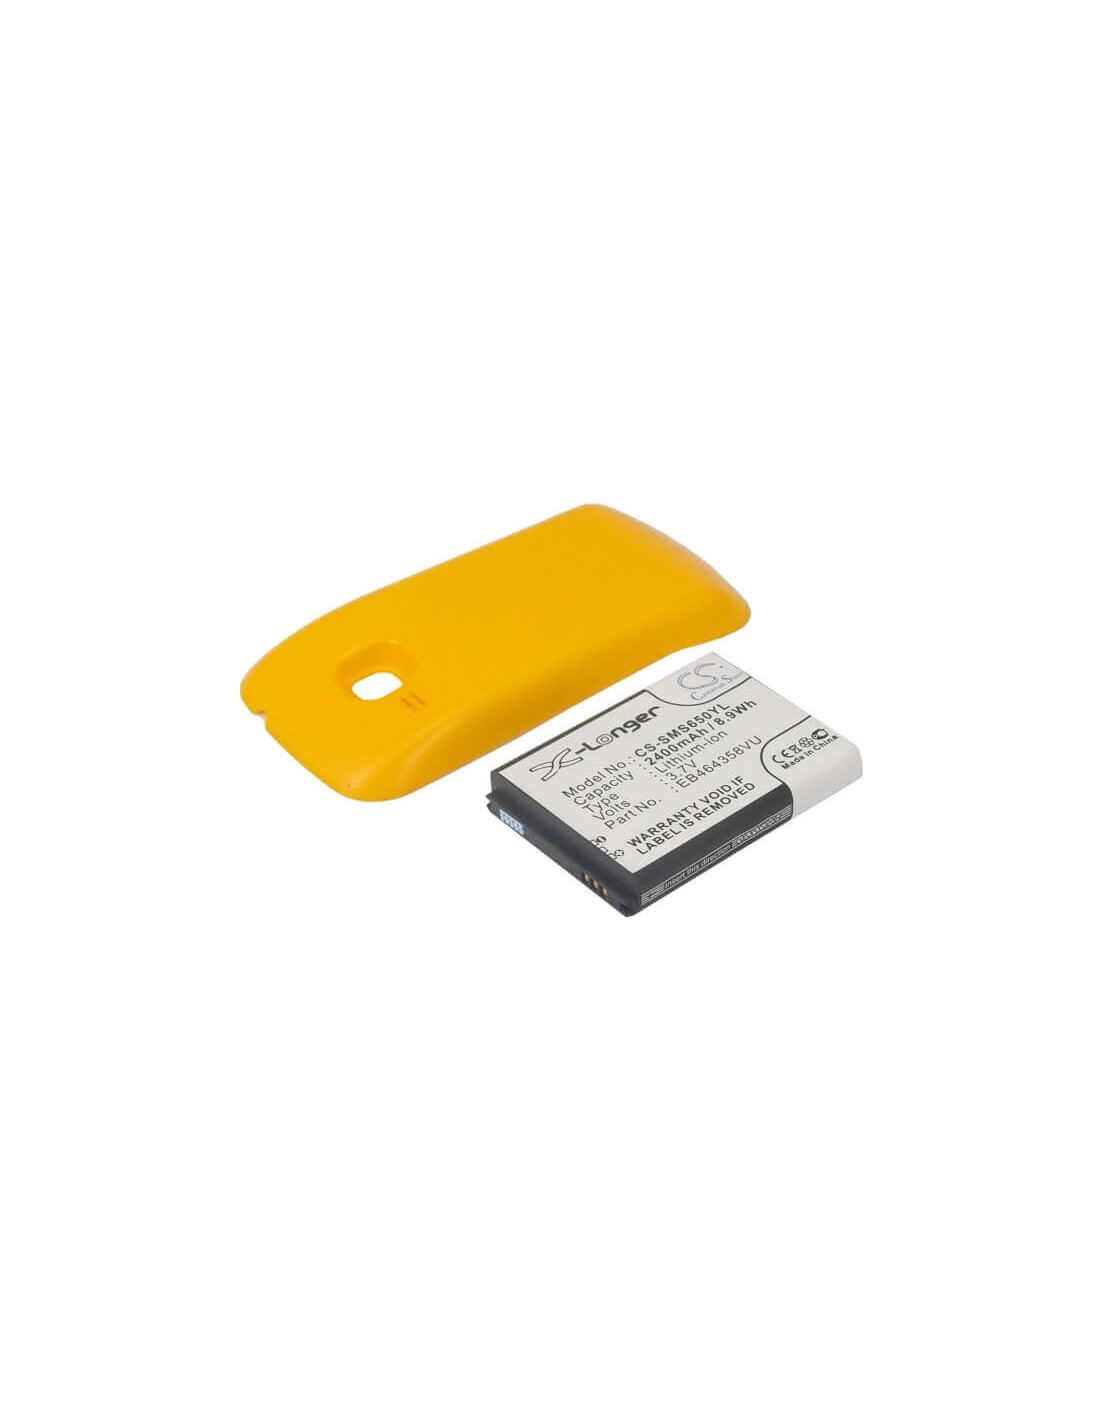 Battery for Samsung GT-S6500, GT-S6500D, Galaxy Mini 2, yellow cover 3.7V, 2400mAh - 8.88Wh